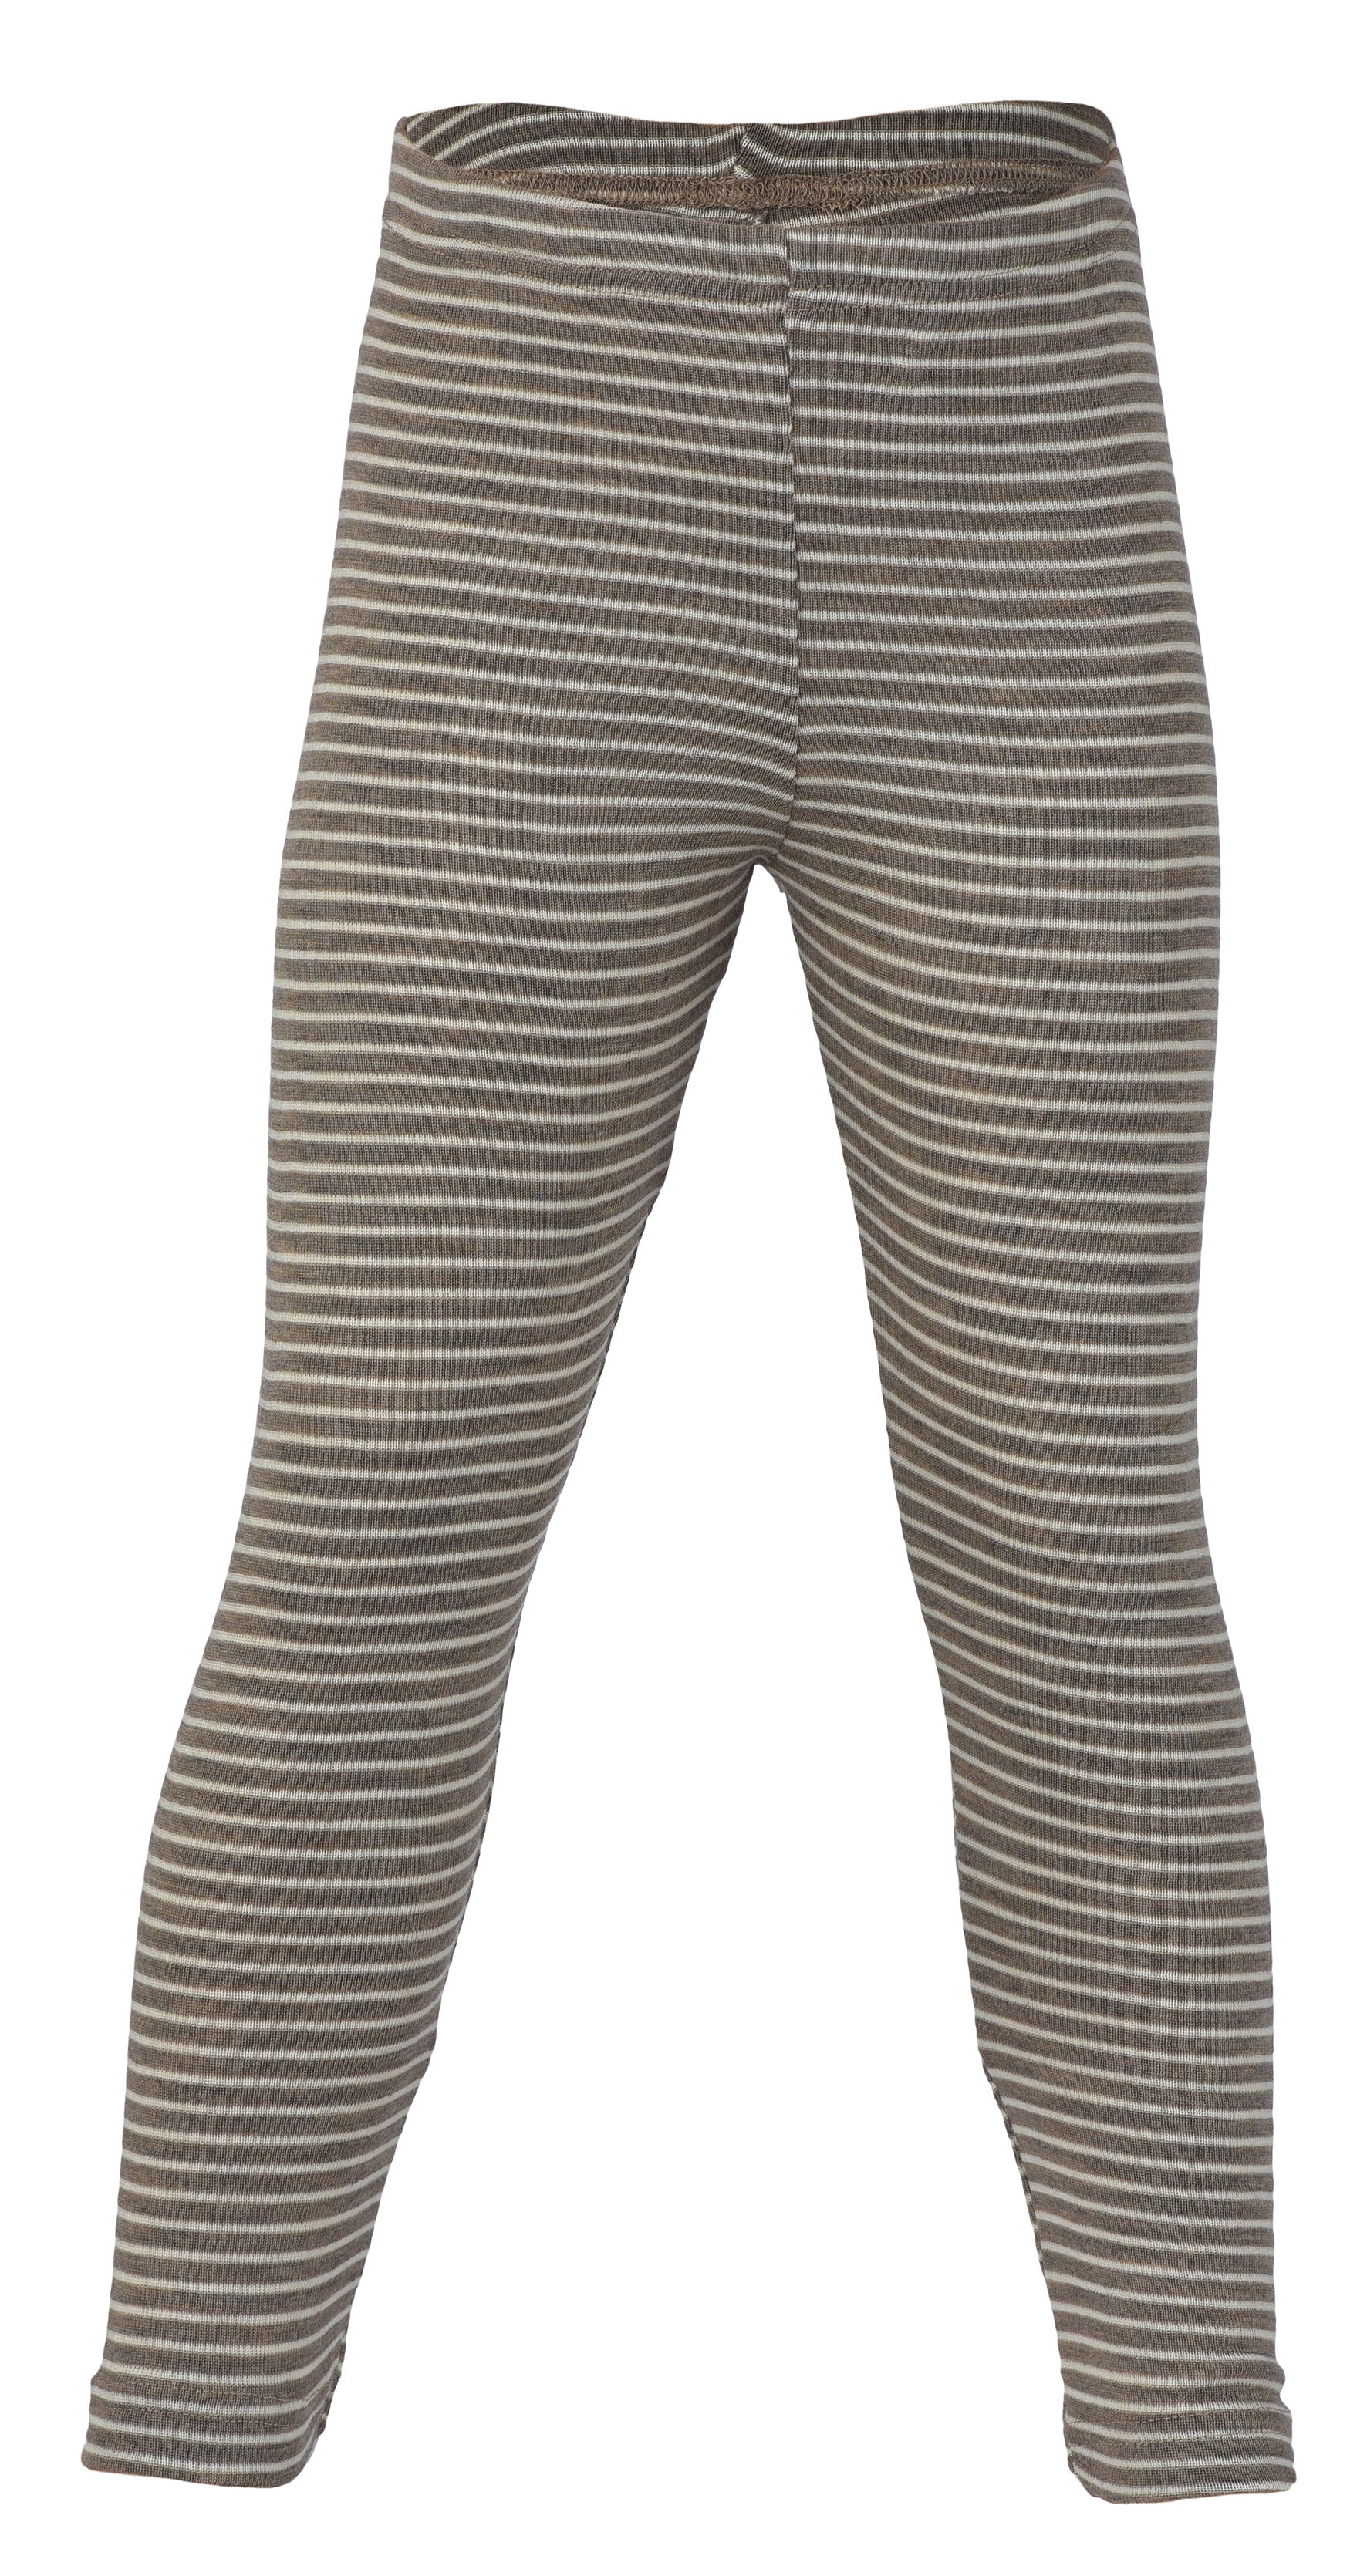 Baby and children's tights Merino wool stripes